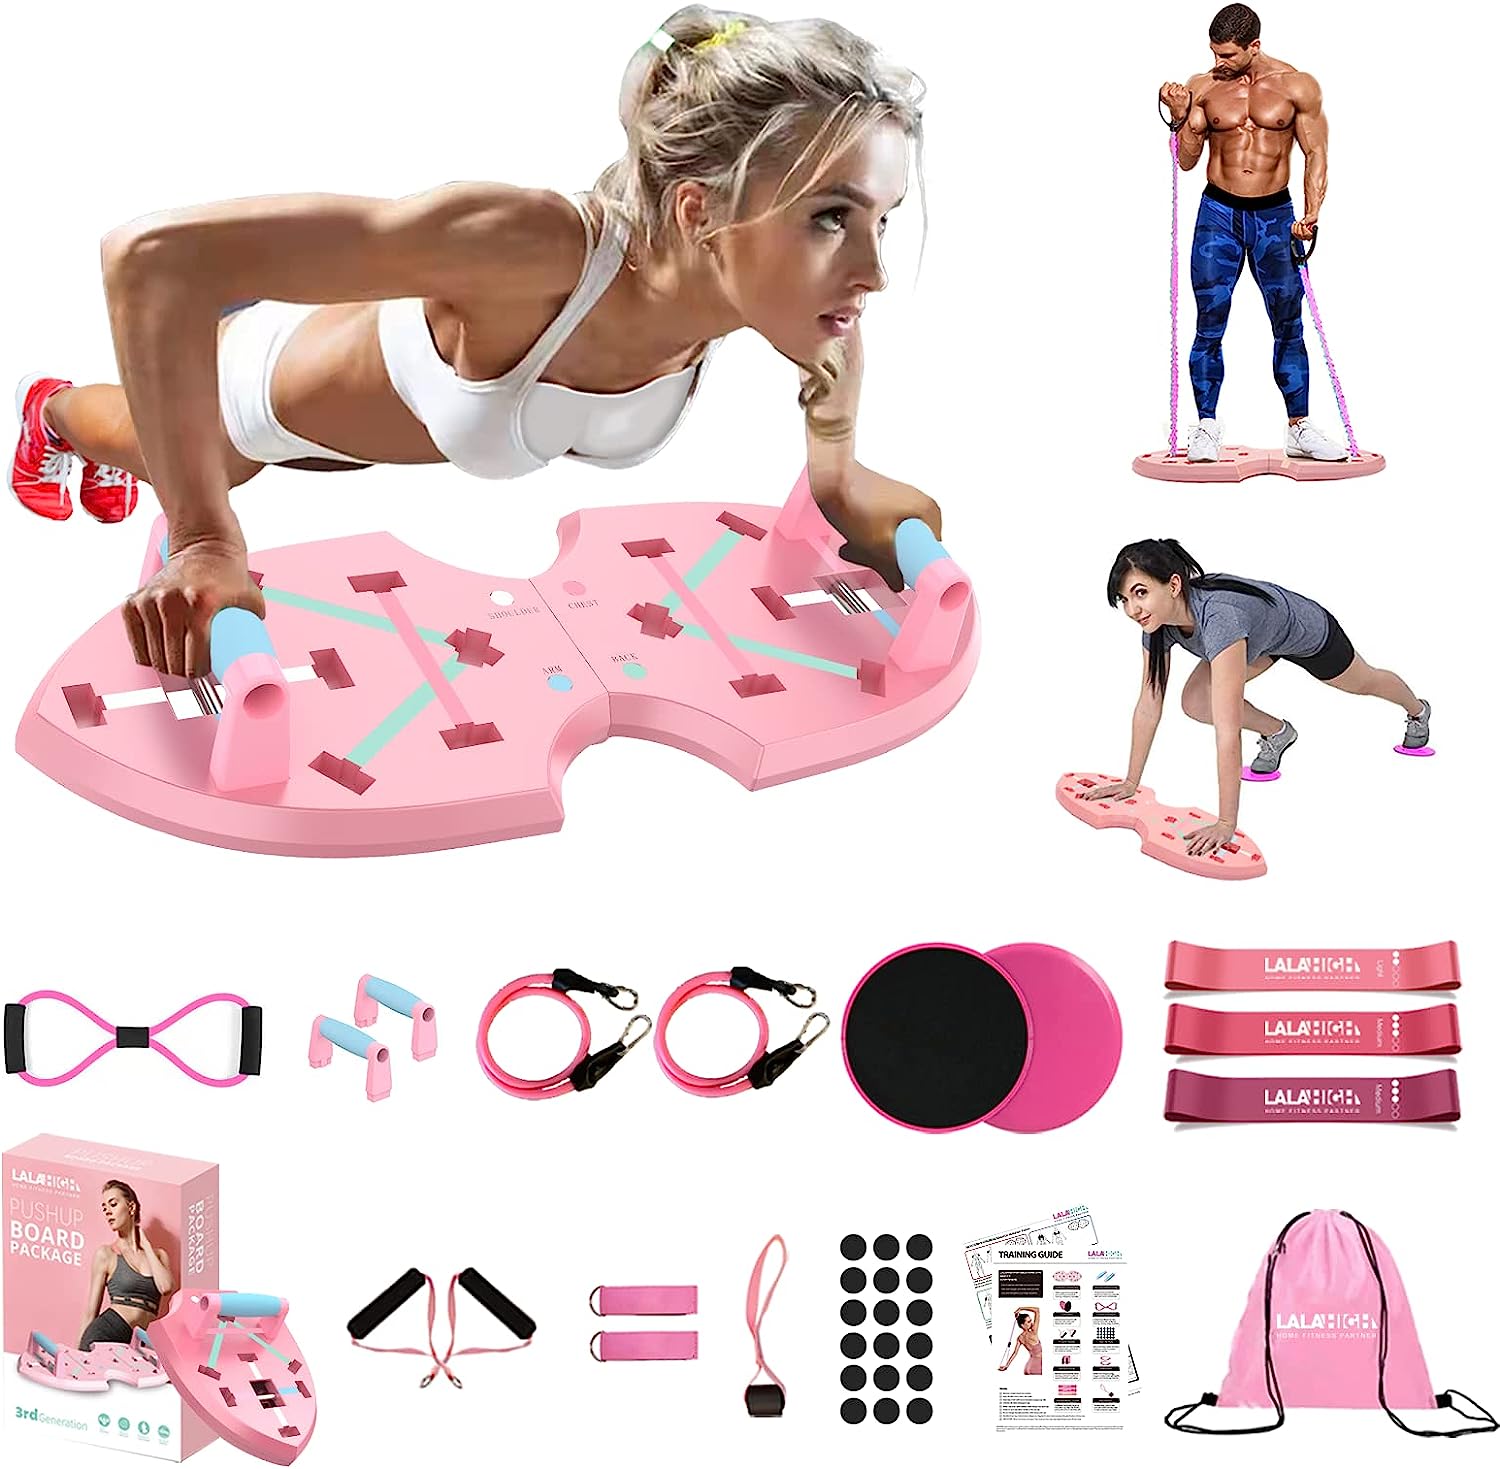 LALAHIGH Home Gym Equipment, Upgraded Push Up Board, 32 in 1 Home Workout Set with Foldable Push Up Bar, Resistance Bands, Core Sliders for Body Toning  Strength Training - Premium Pink Edition